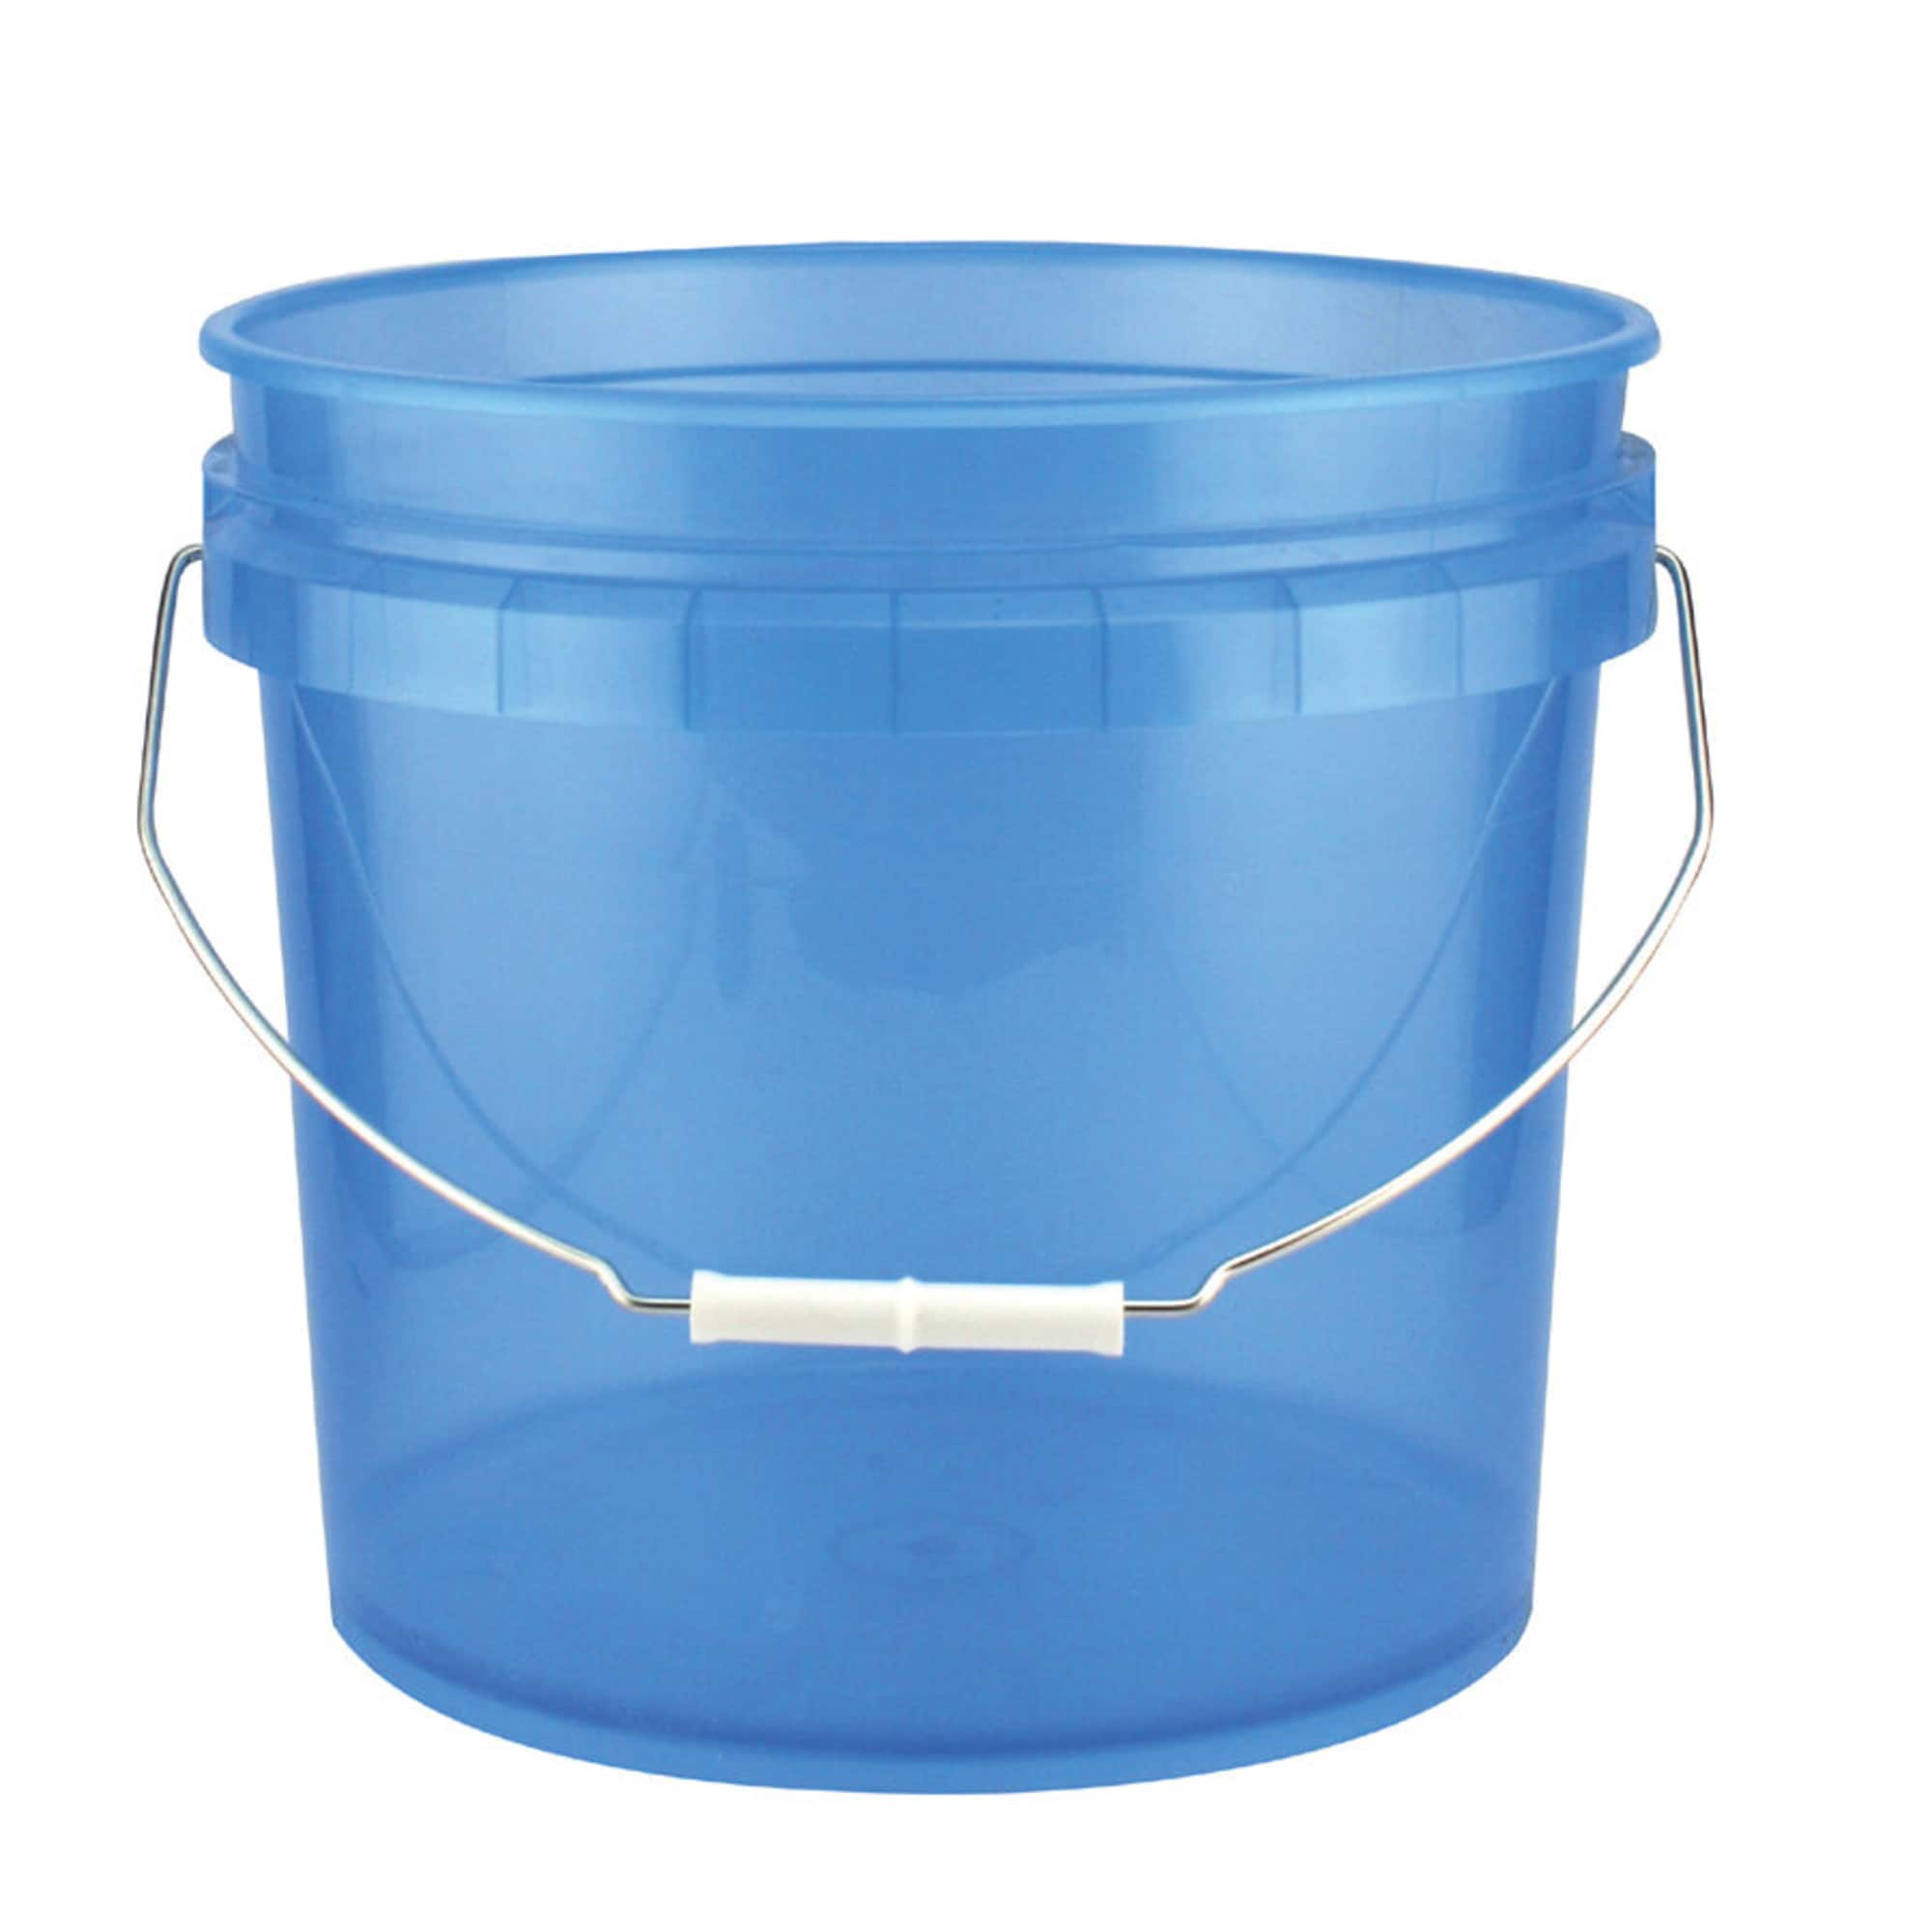  3.5 Gallon Bucket with Lids, Food Grade Storage, Premium HPDE  Plastic, BPA Free, Durable 90 Mil All Purpose Pail, Made in USA, 5 Pack:  Home & Kitchen